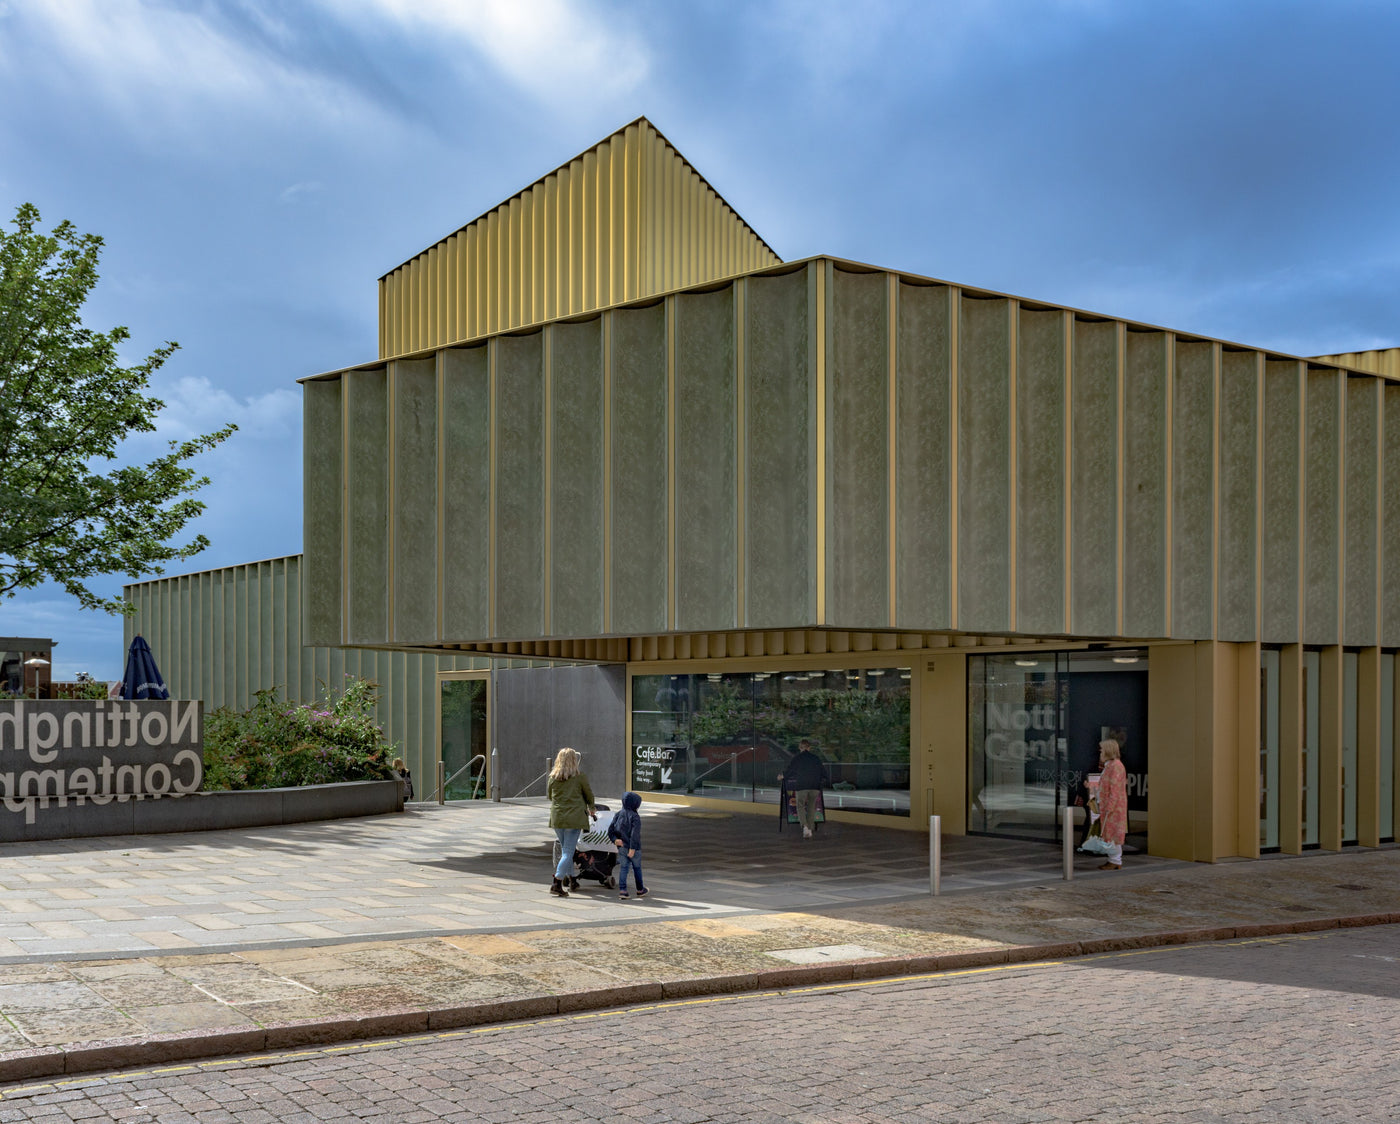 Exterior view of Nottingham Contemporary's building - from street view. 